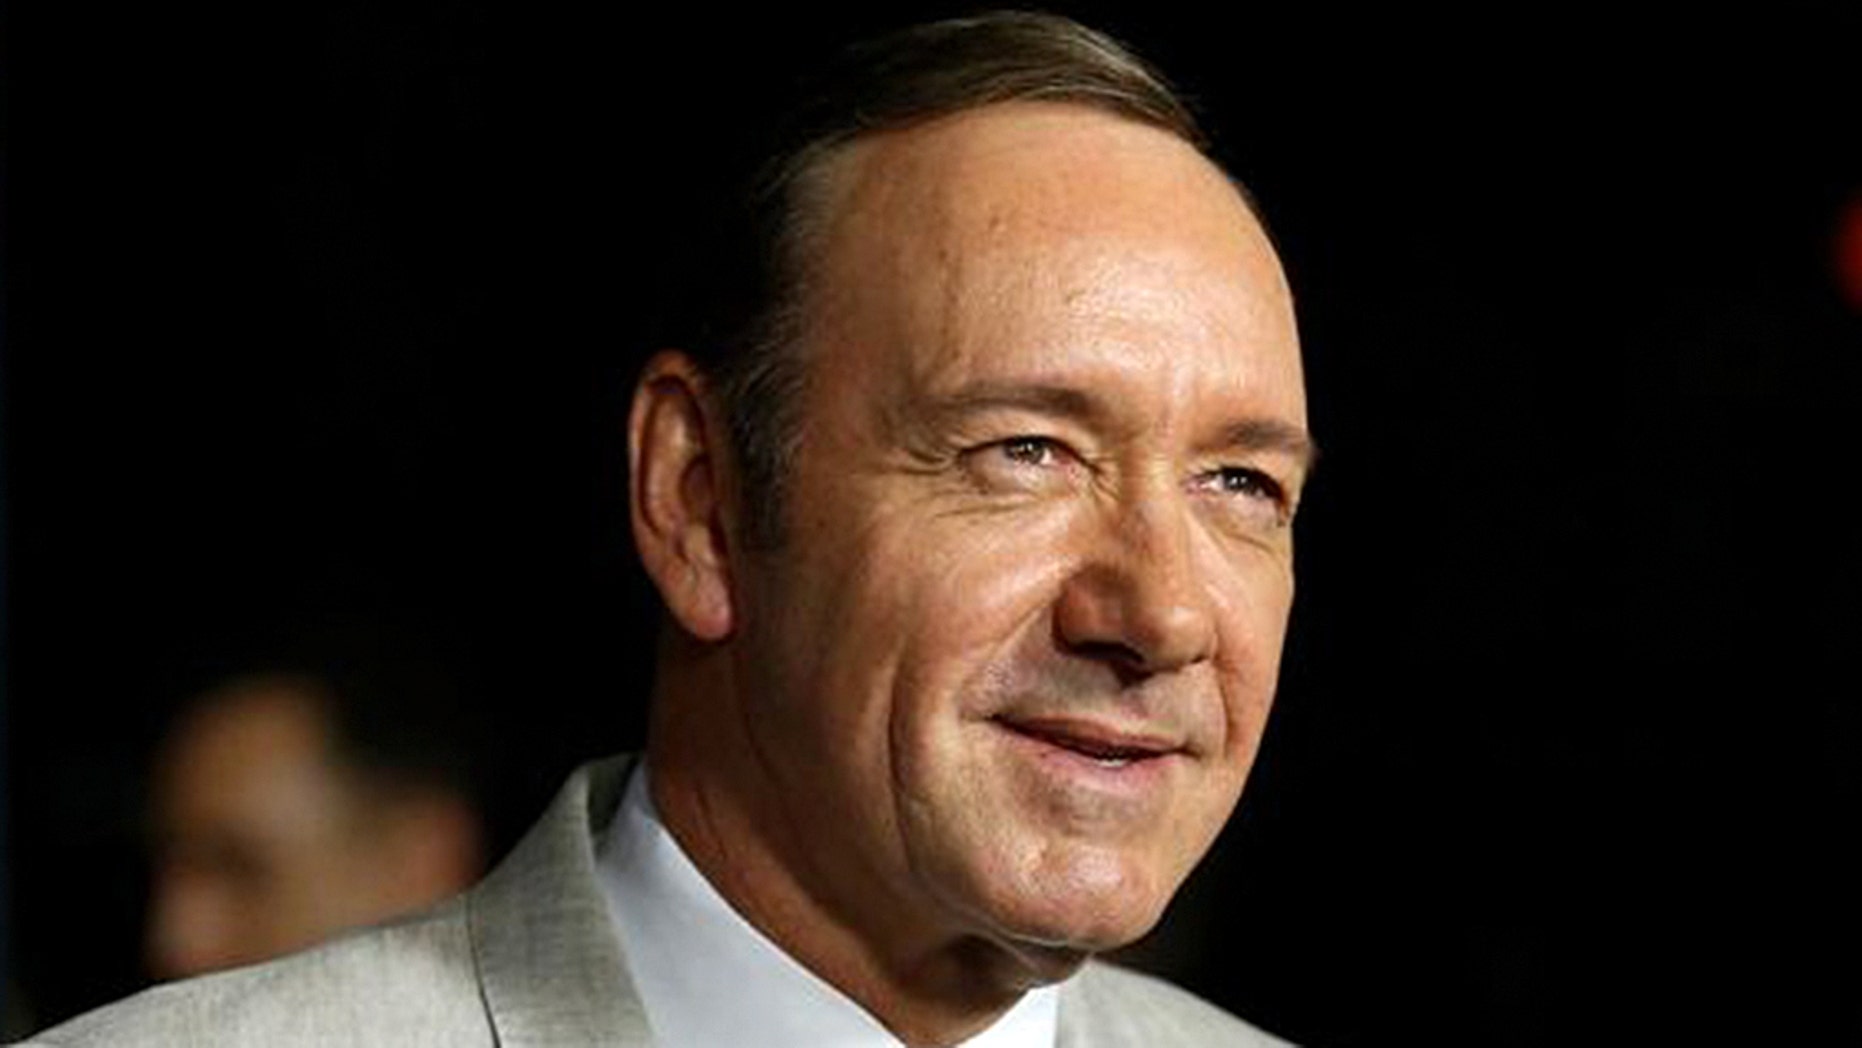 Kevin Spacey Facing 3 New Sexual Assault Allegations In London Report